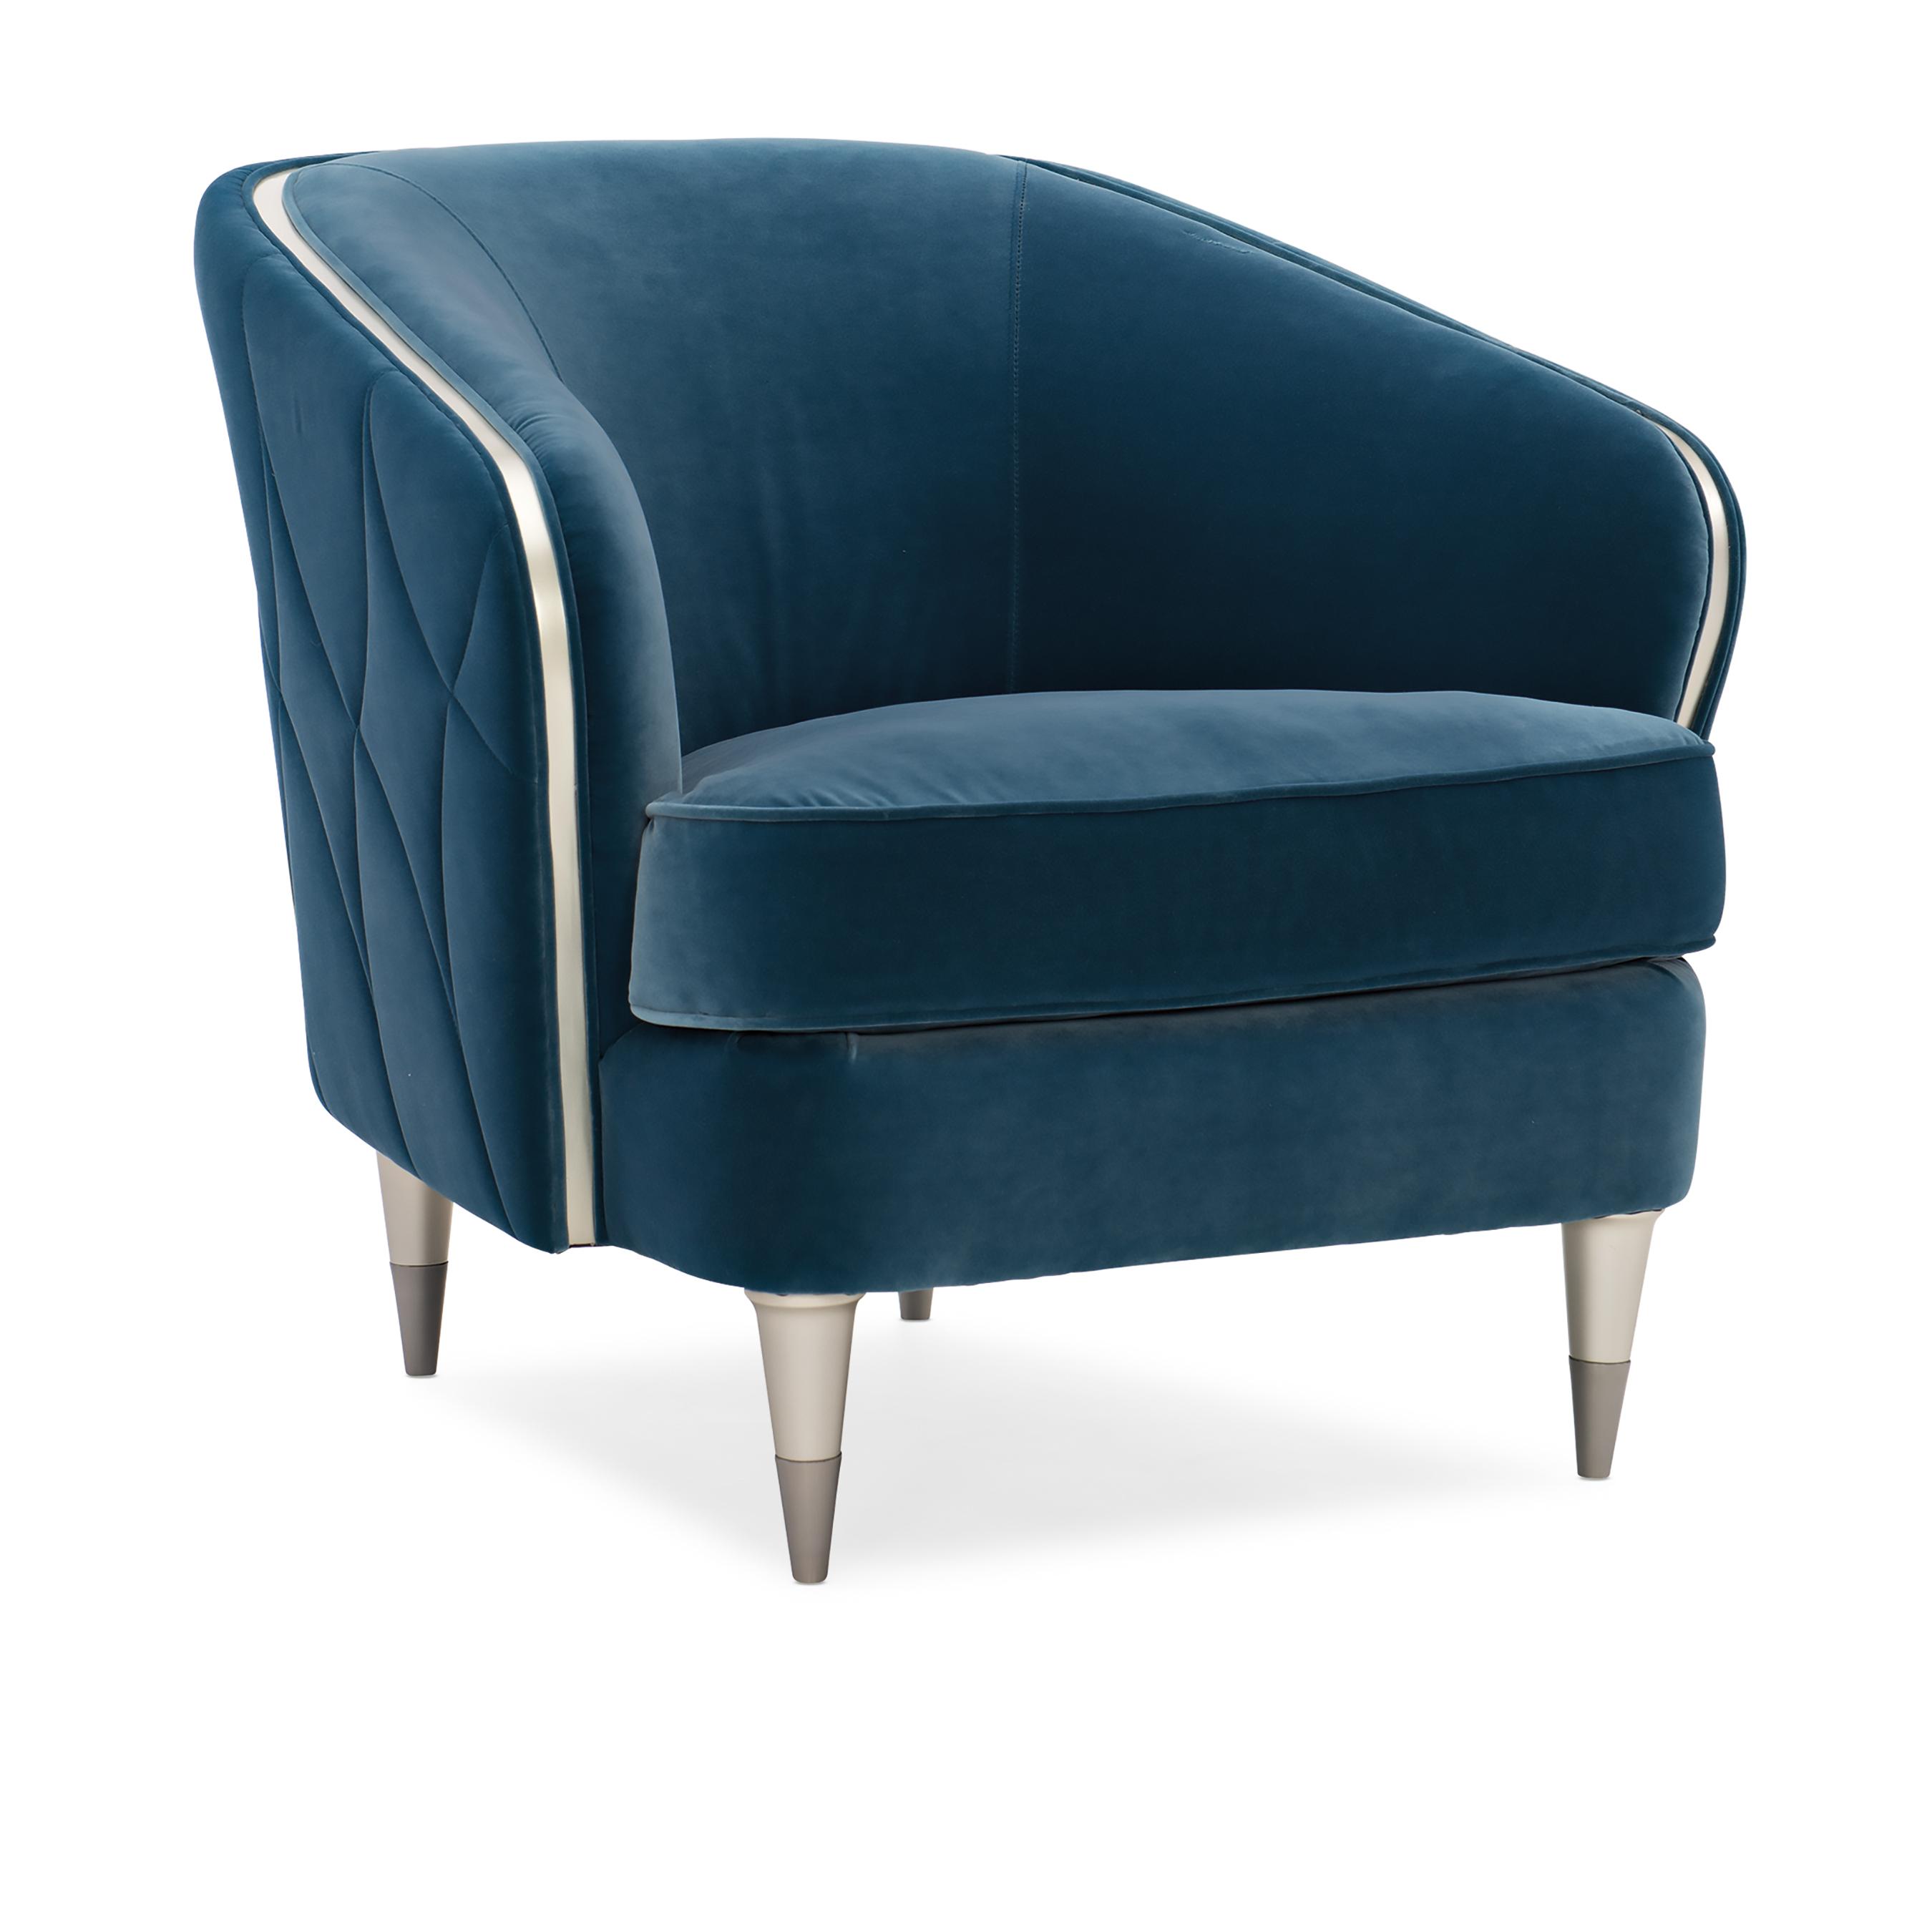 

    
UPH-419-011-A-Set-2 Prussian Blue Velvet Finish Sofa & Chair Set Contemporary Hour Time by Caracole
